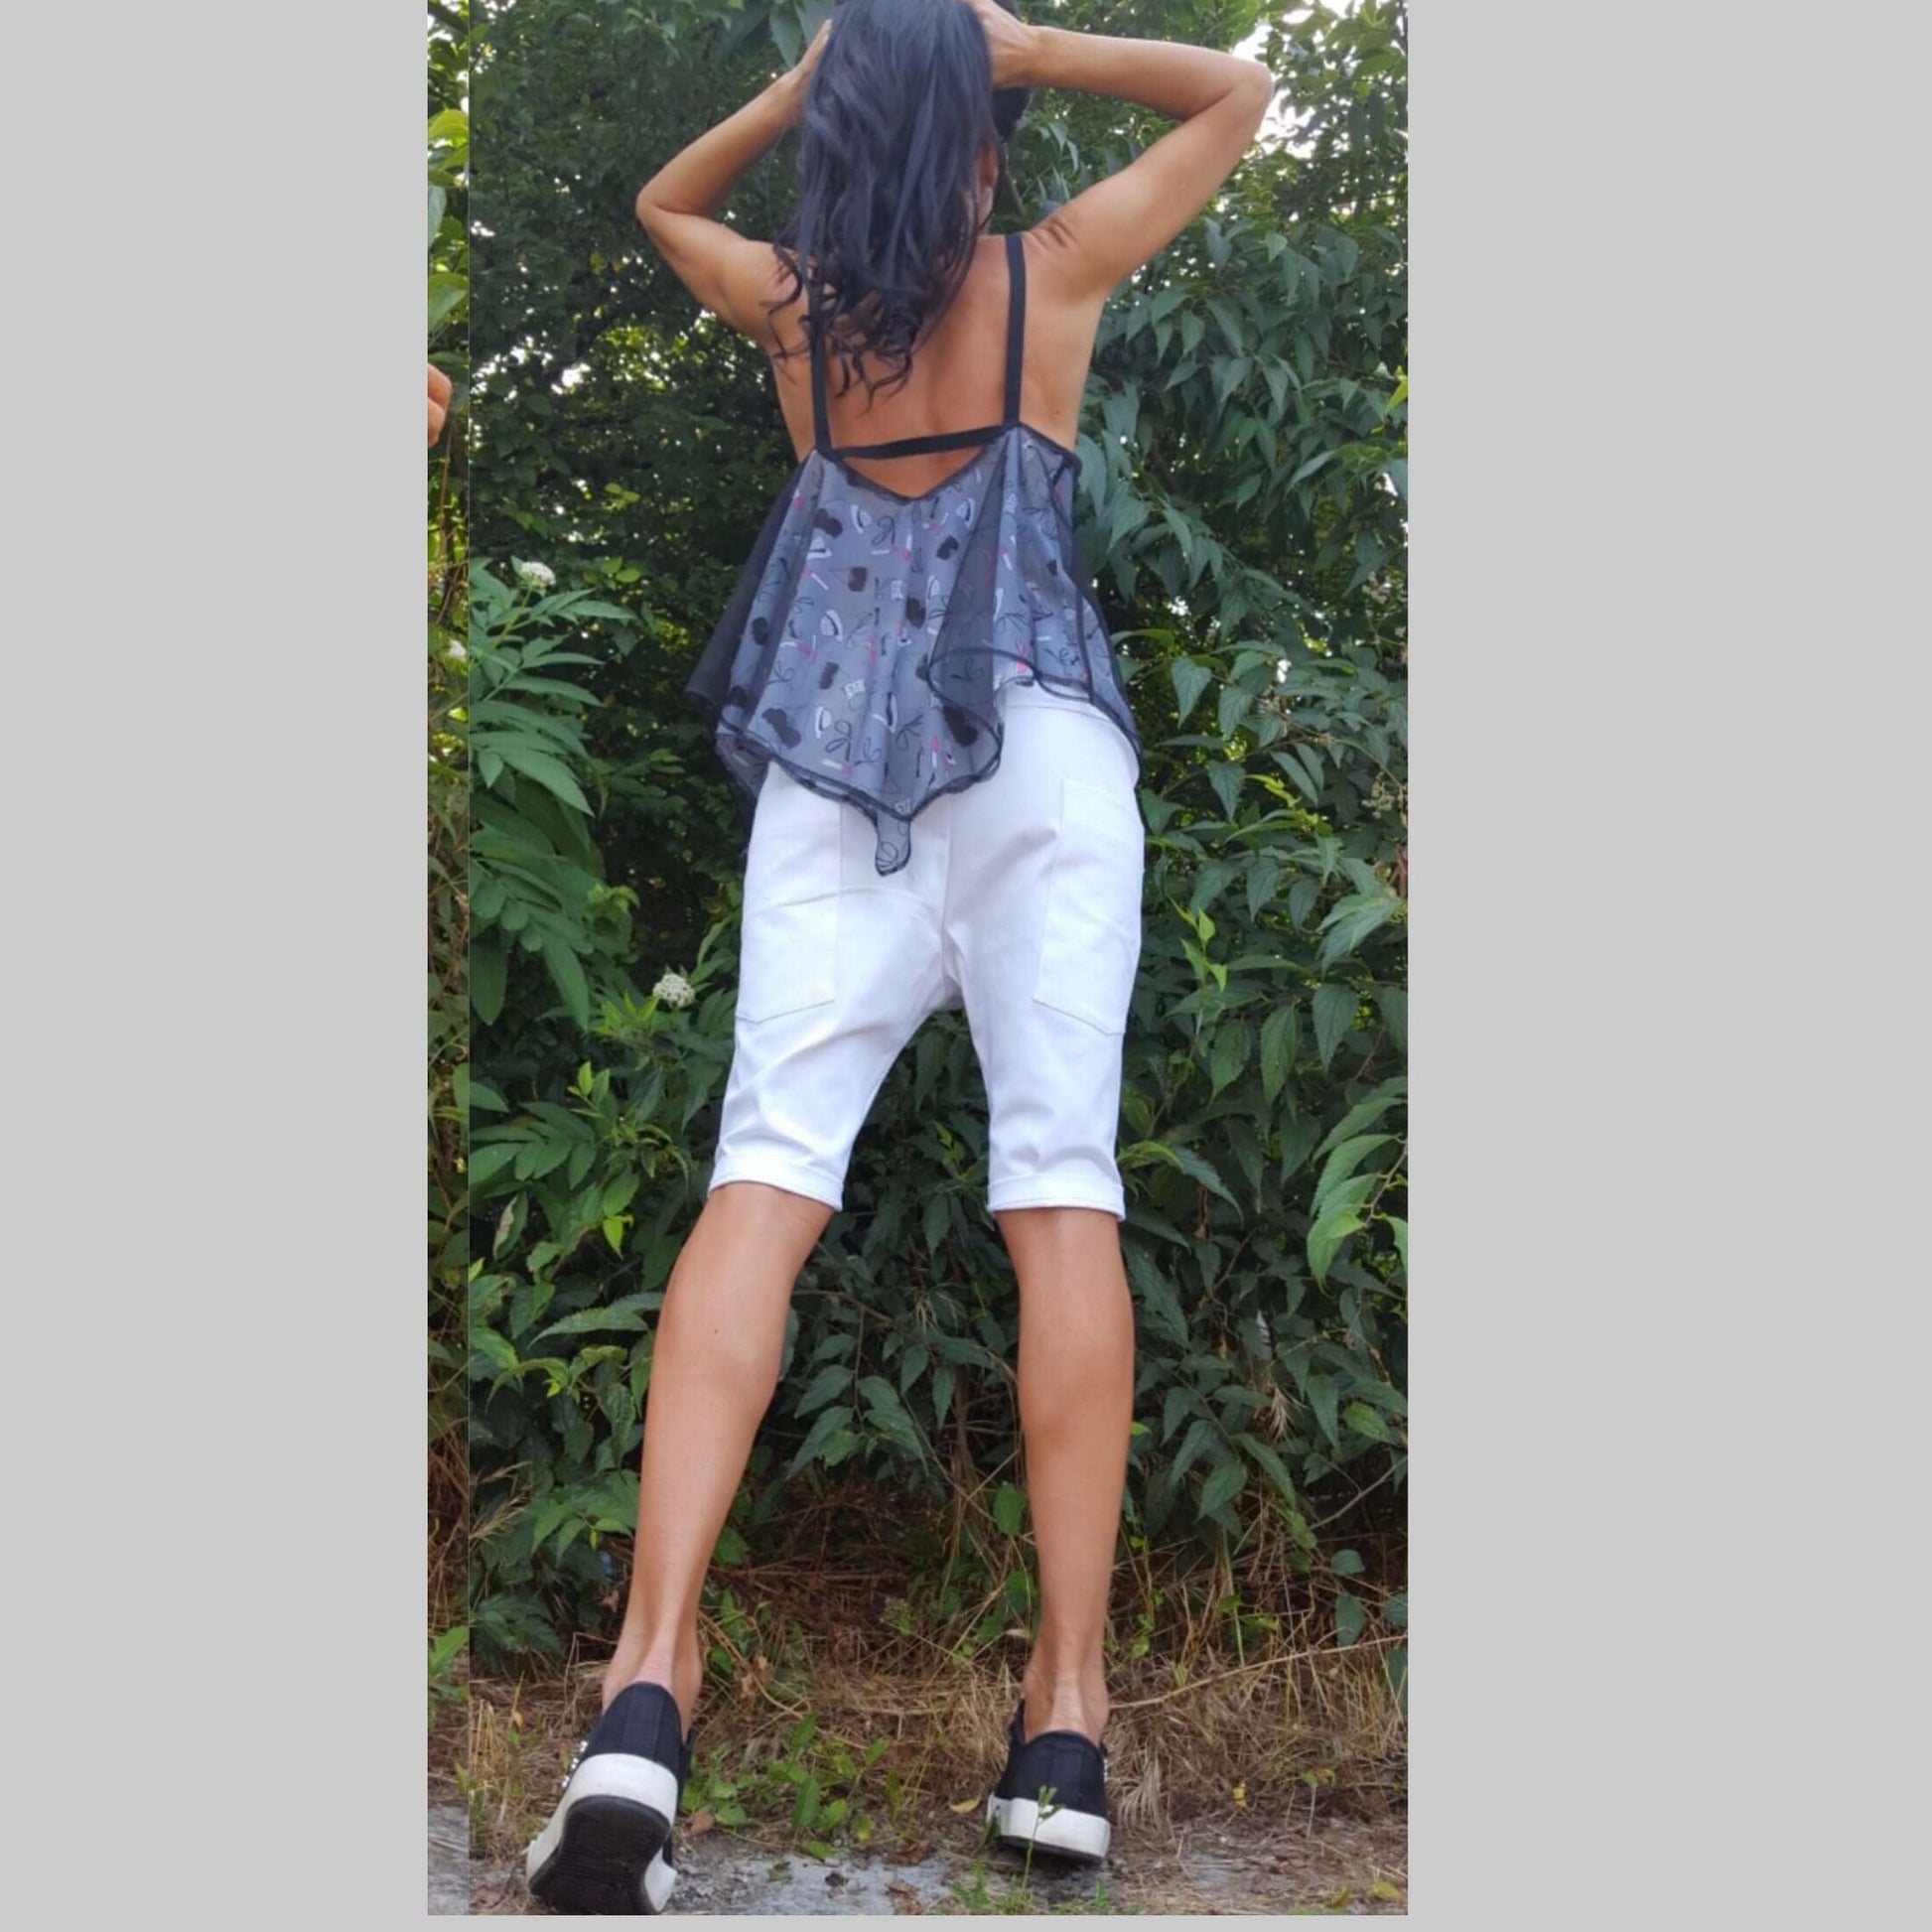 Fall Everyday Pants - Handmade clothing from AngelBySilvia - Top Designer Brands 